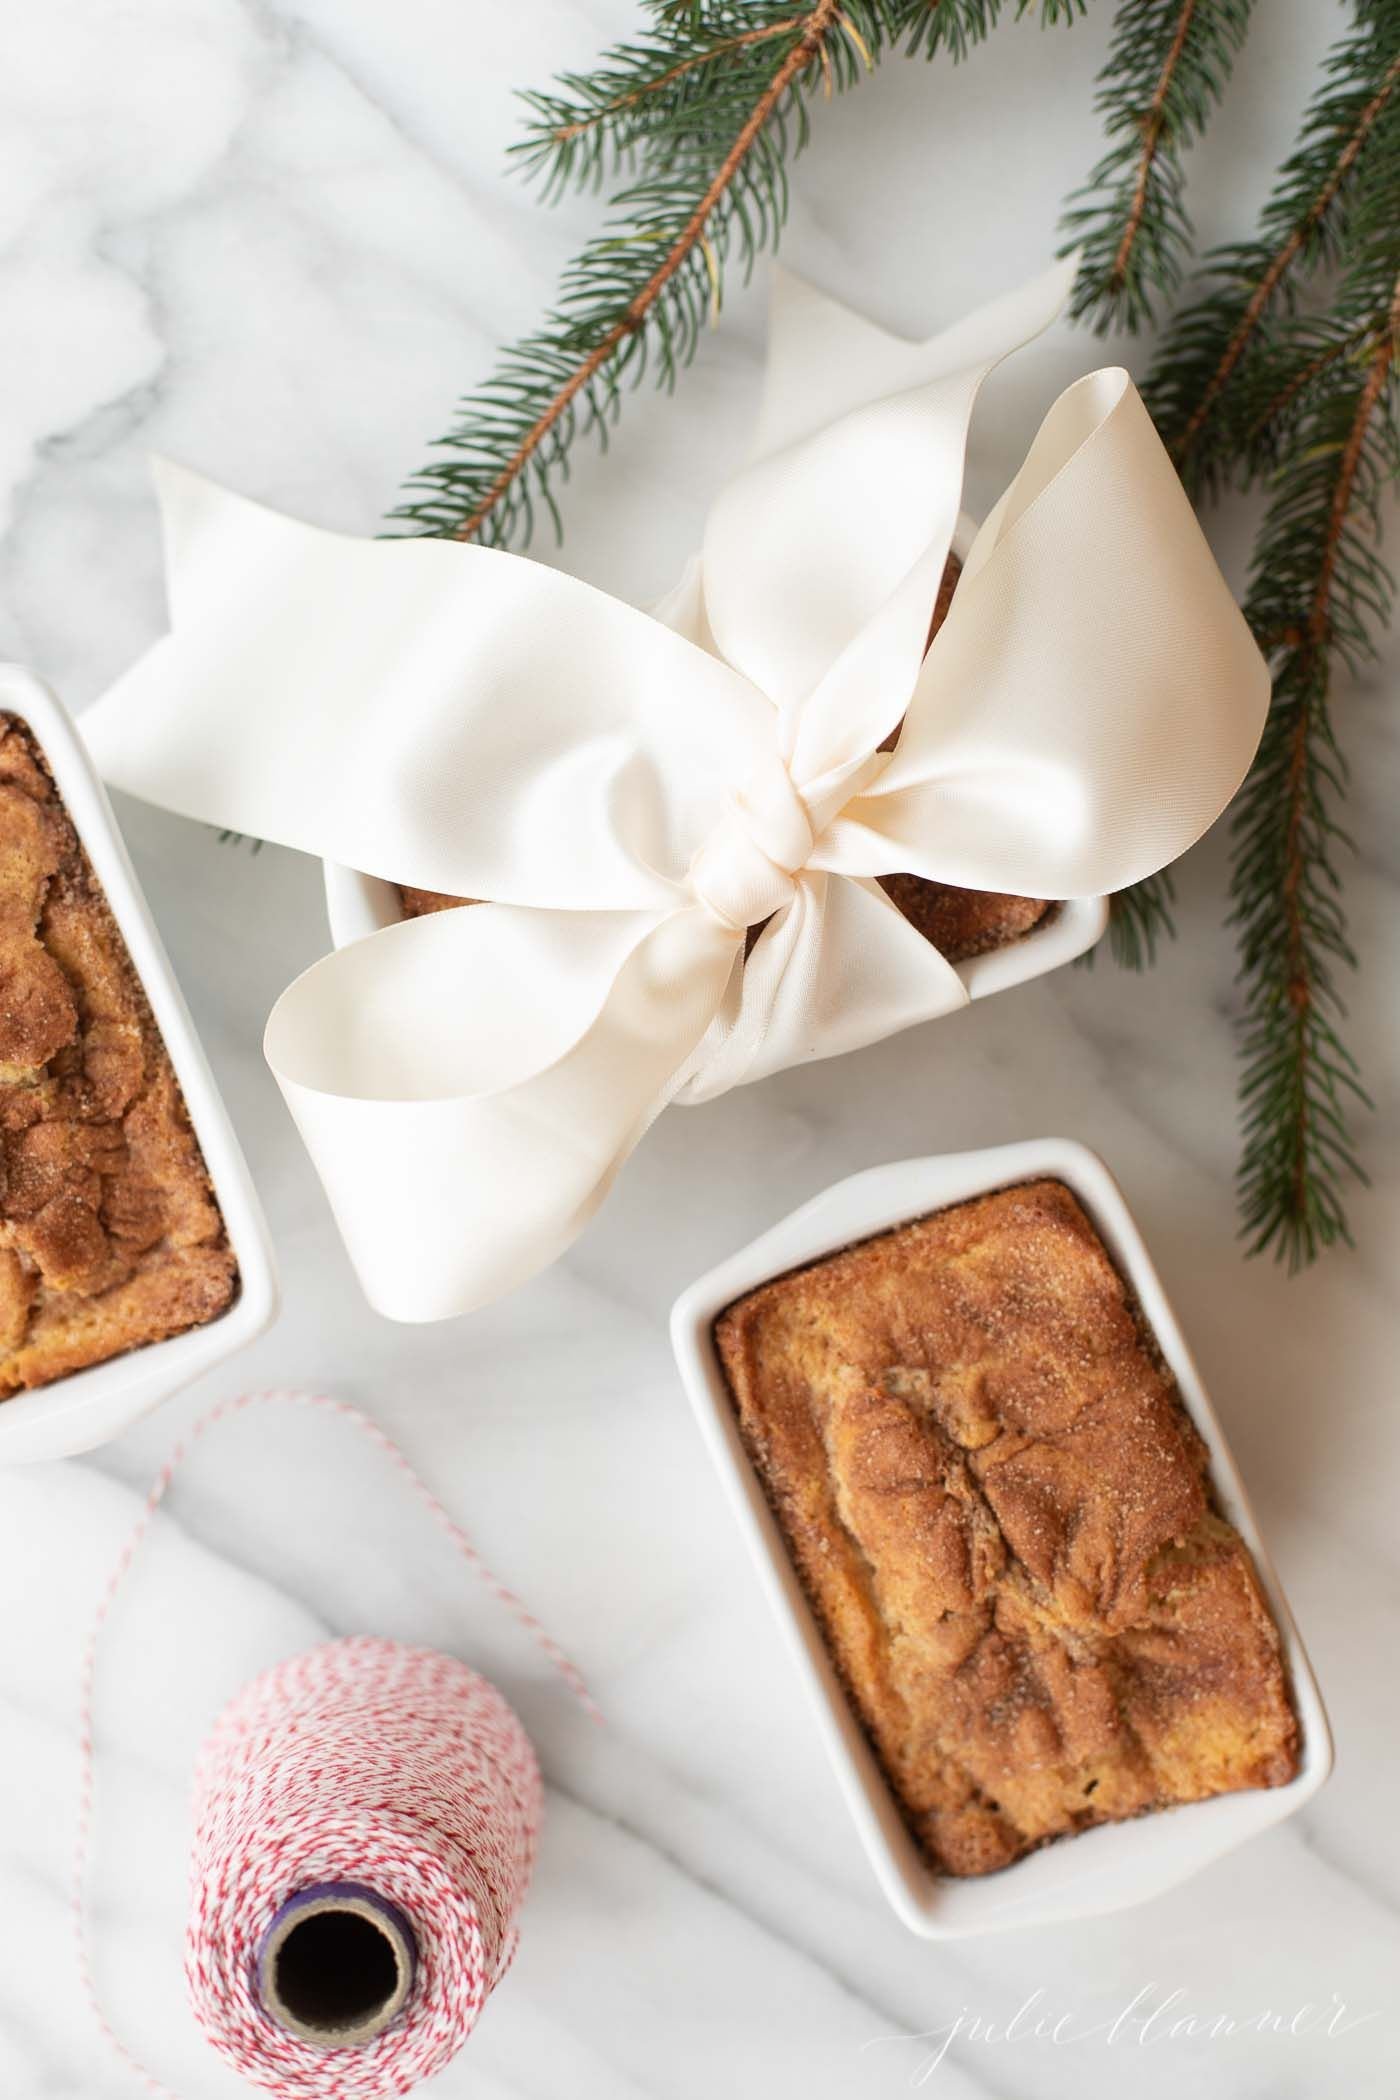 Small loaves of cinnamon bread, tied with ivory ribbon on a marble countertop for a Christmas gift.